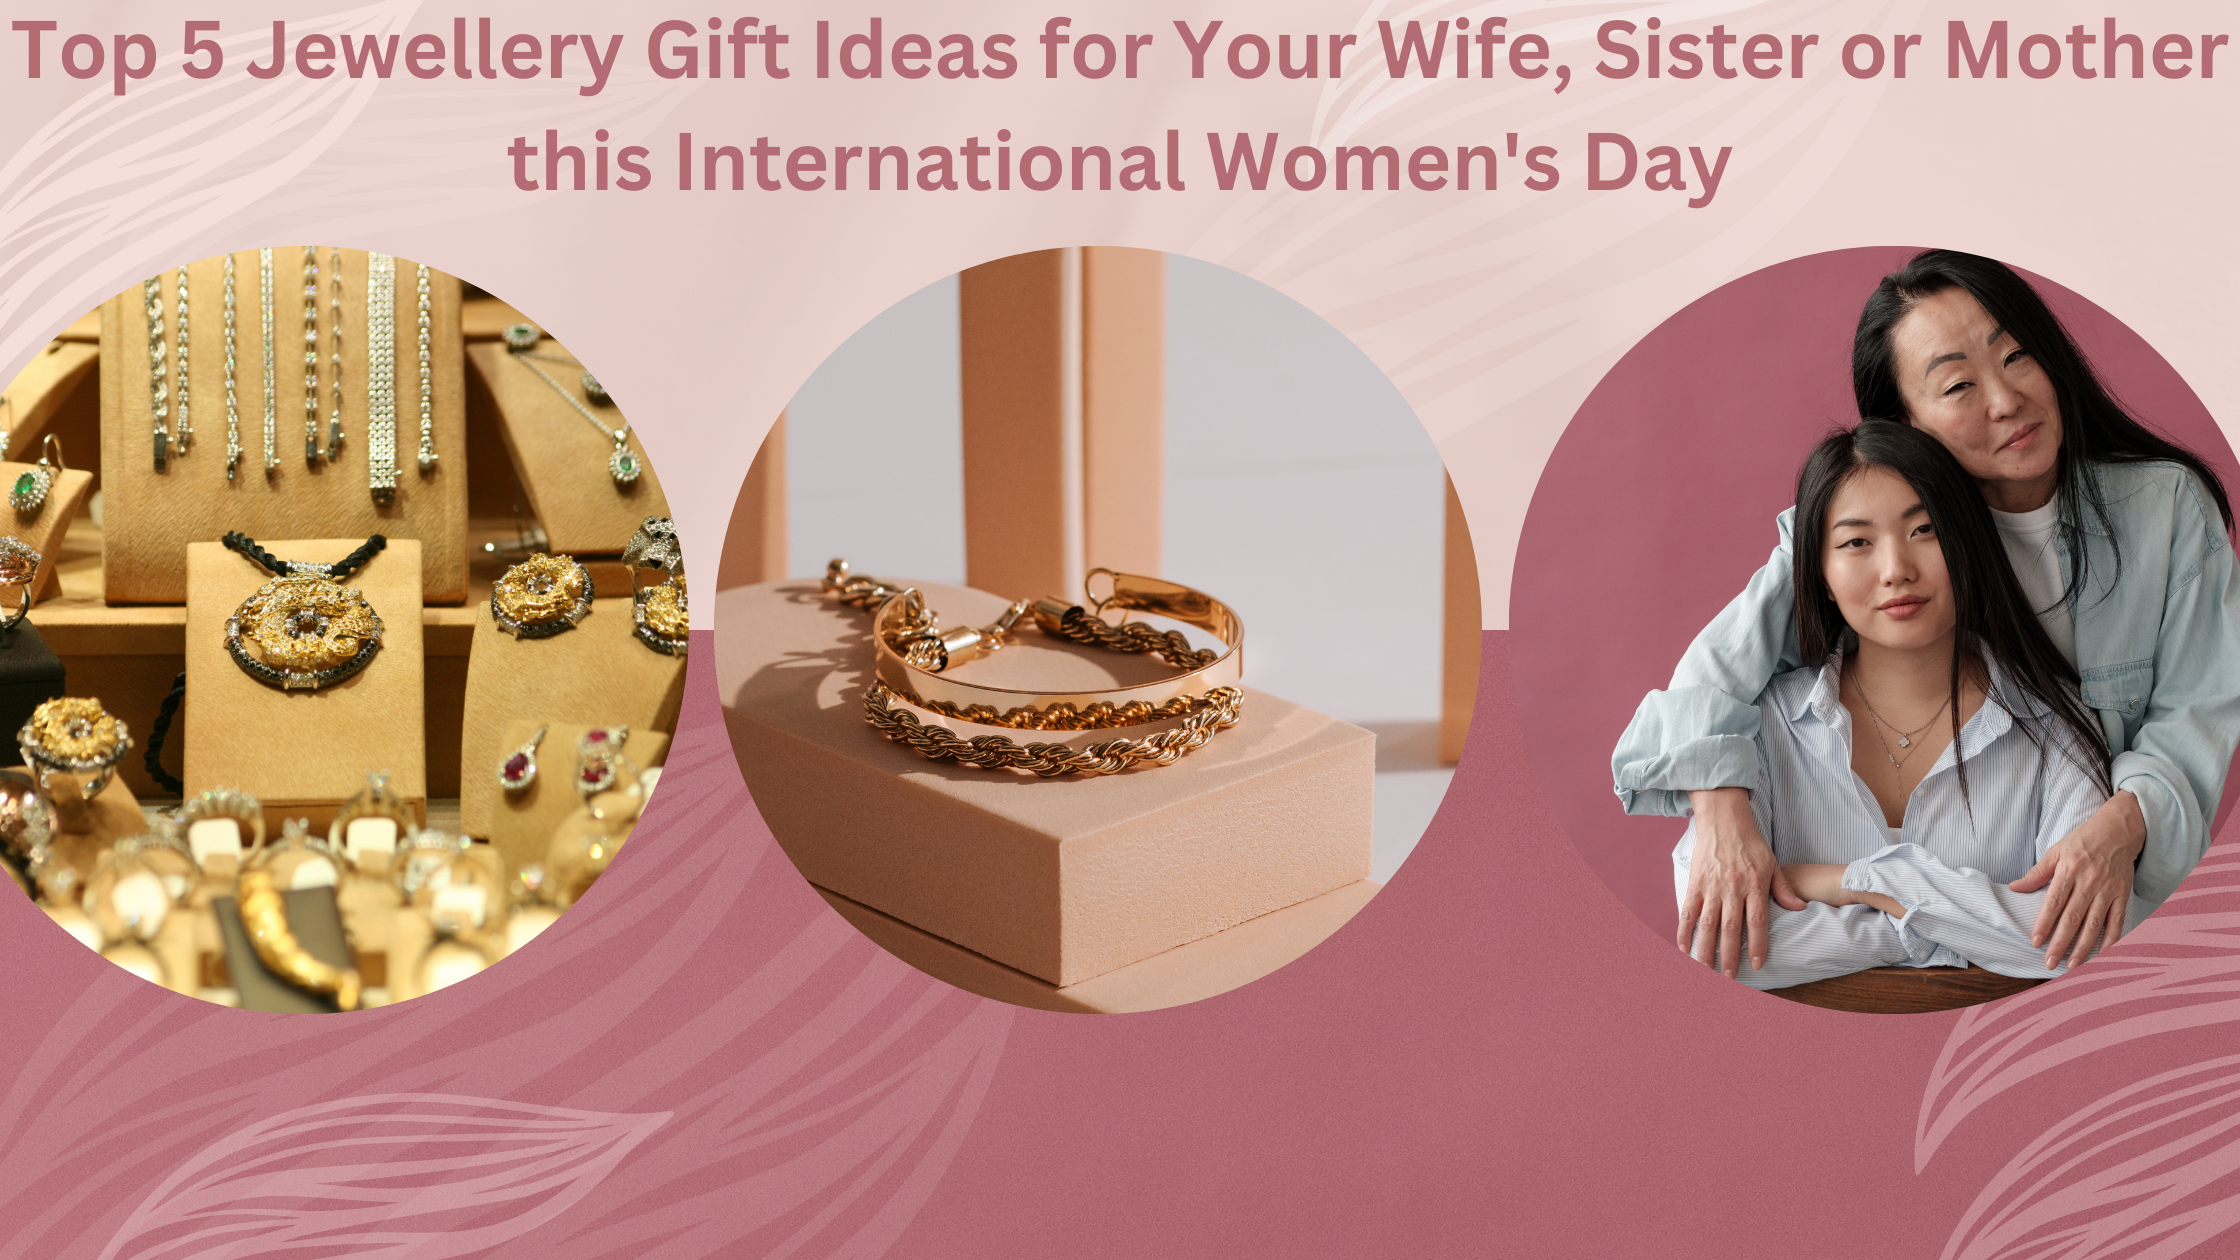 Top 5 Jewellery Gift Ideas for Your Wife, Sister or Mother this International Women's Day